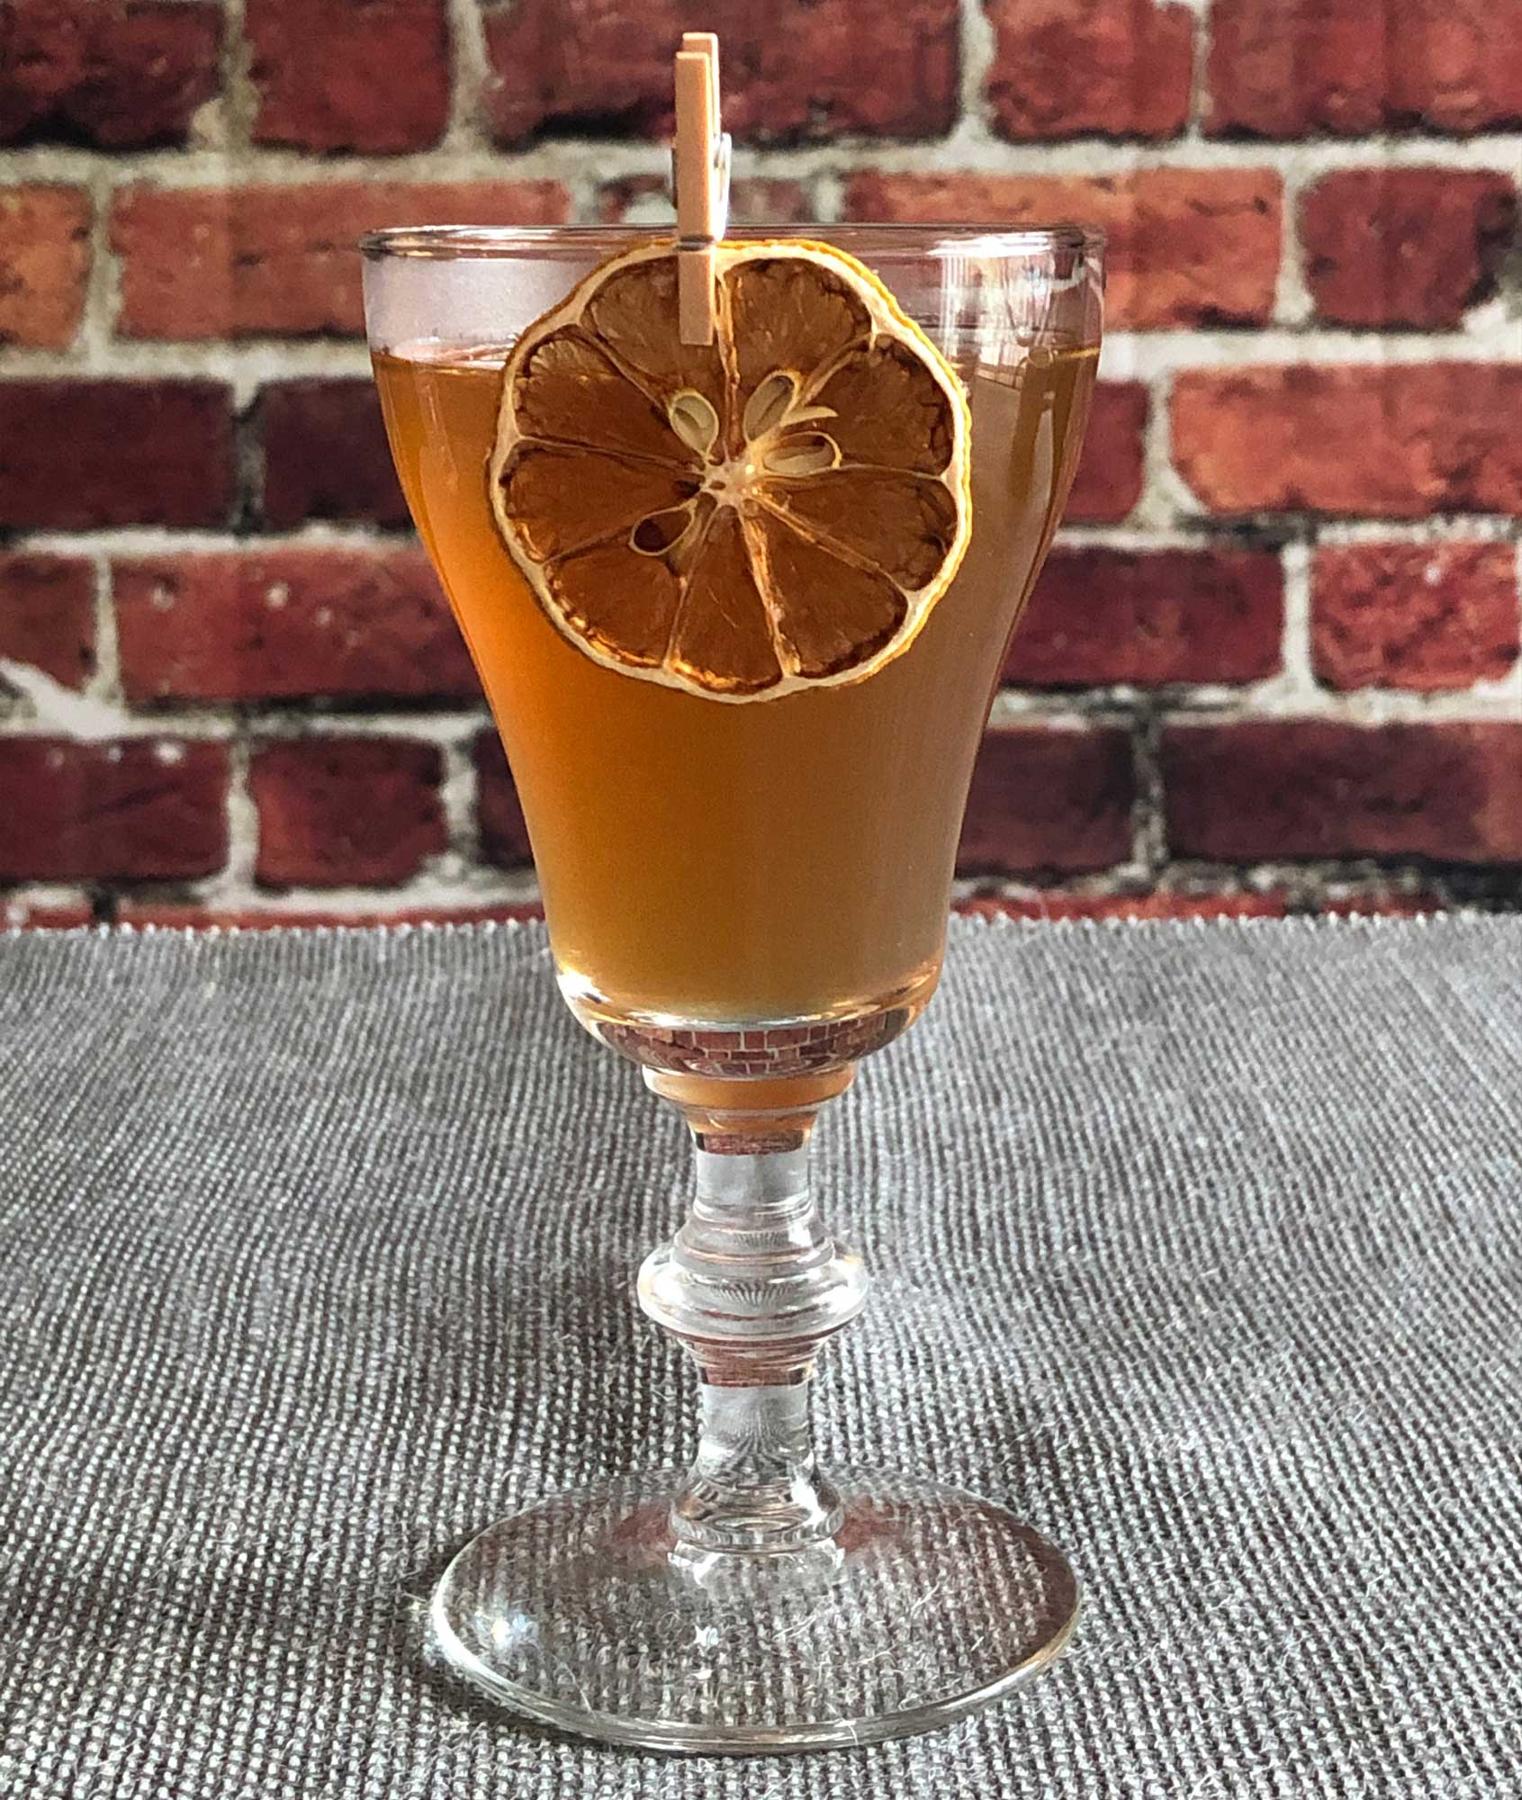 An example of the Bonal Toddy, the mixed drink (drink) featuring hot water, Bonal Gentiane-Quina, rye whiskey, honey syrup, lemon juice, and lemon wheel; photo by Lee Edwards